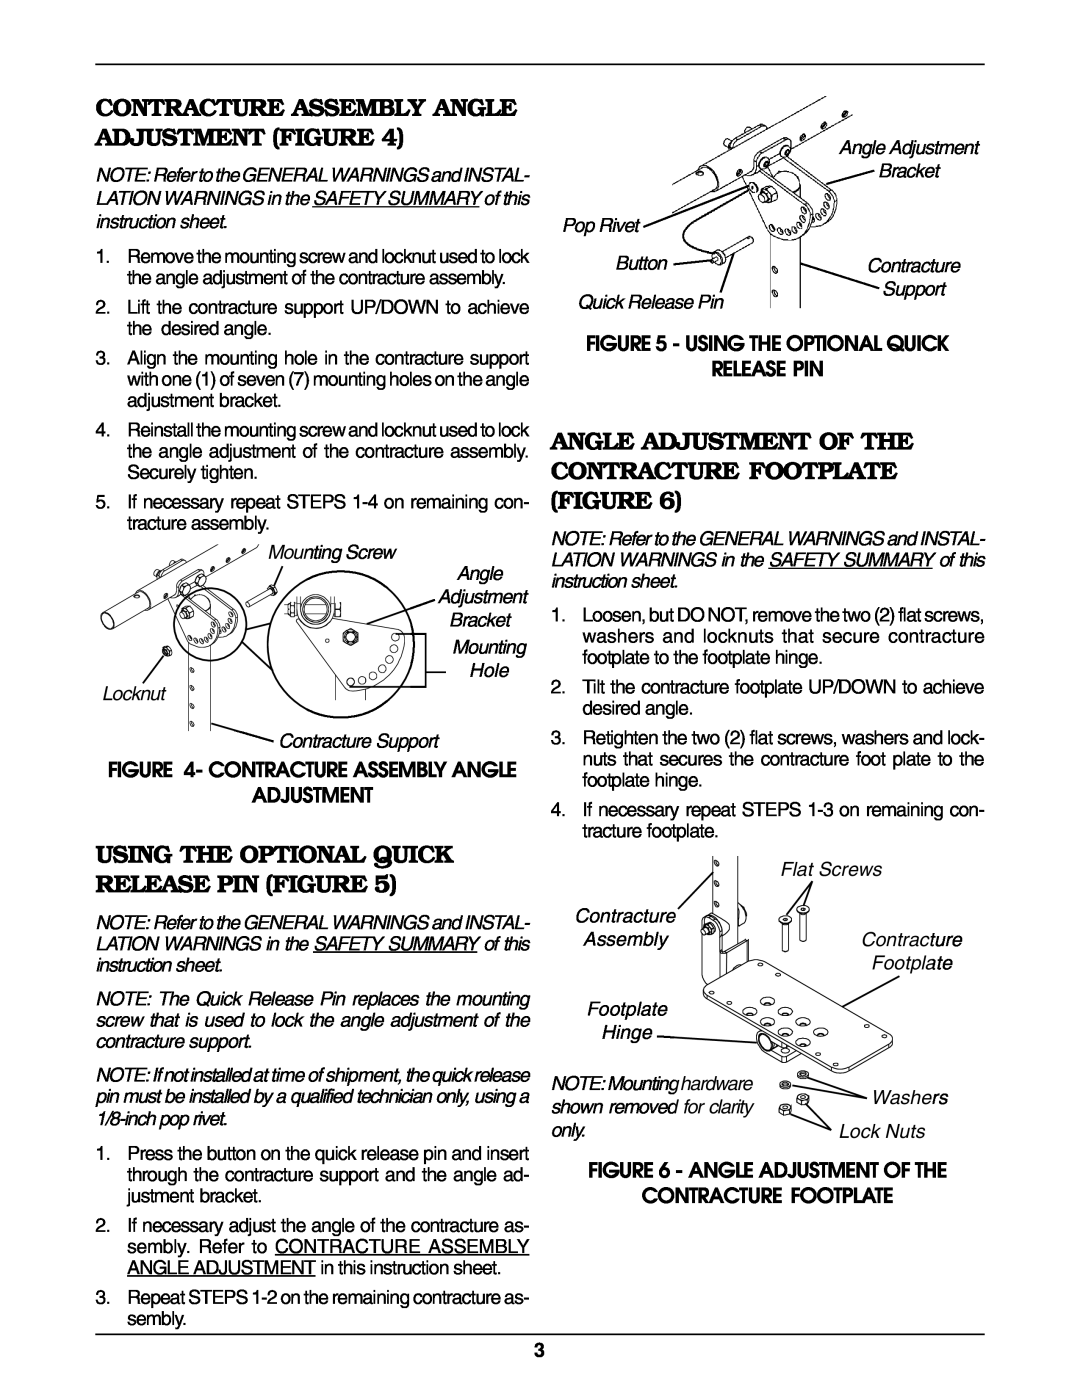 Invacare 1095344 Contracture Assembly Angle Adjustment Figure, Angle Adjustment Of The Contracture Footplate Figure 